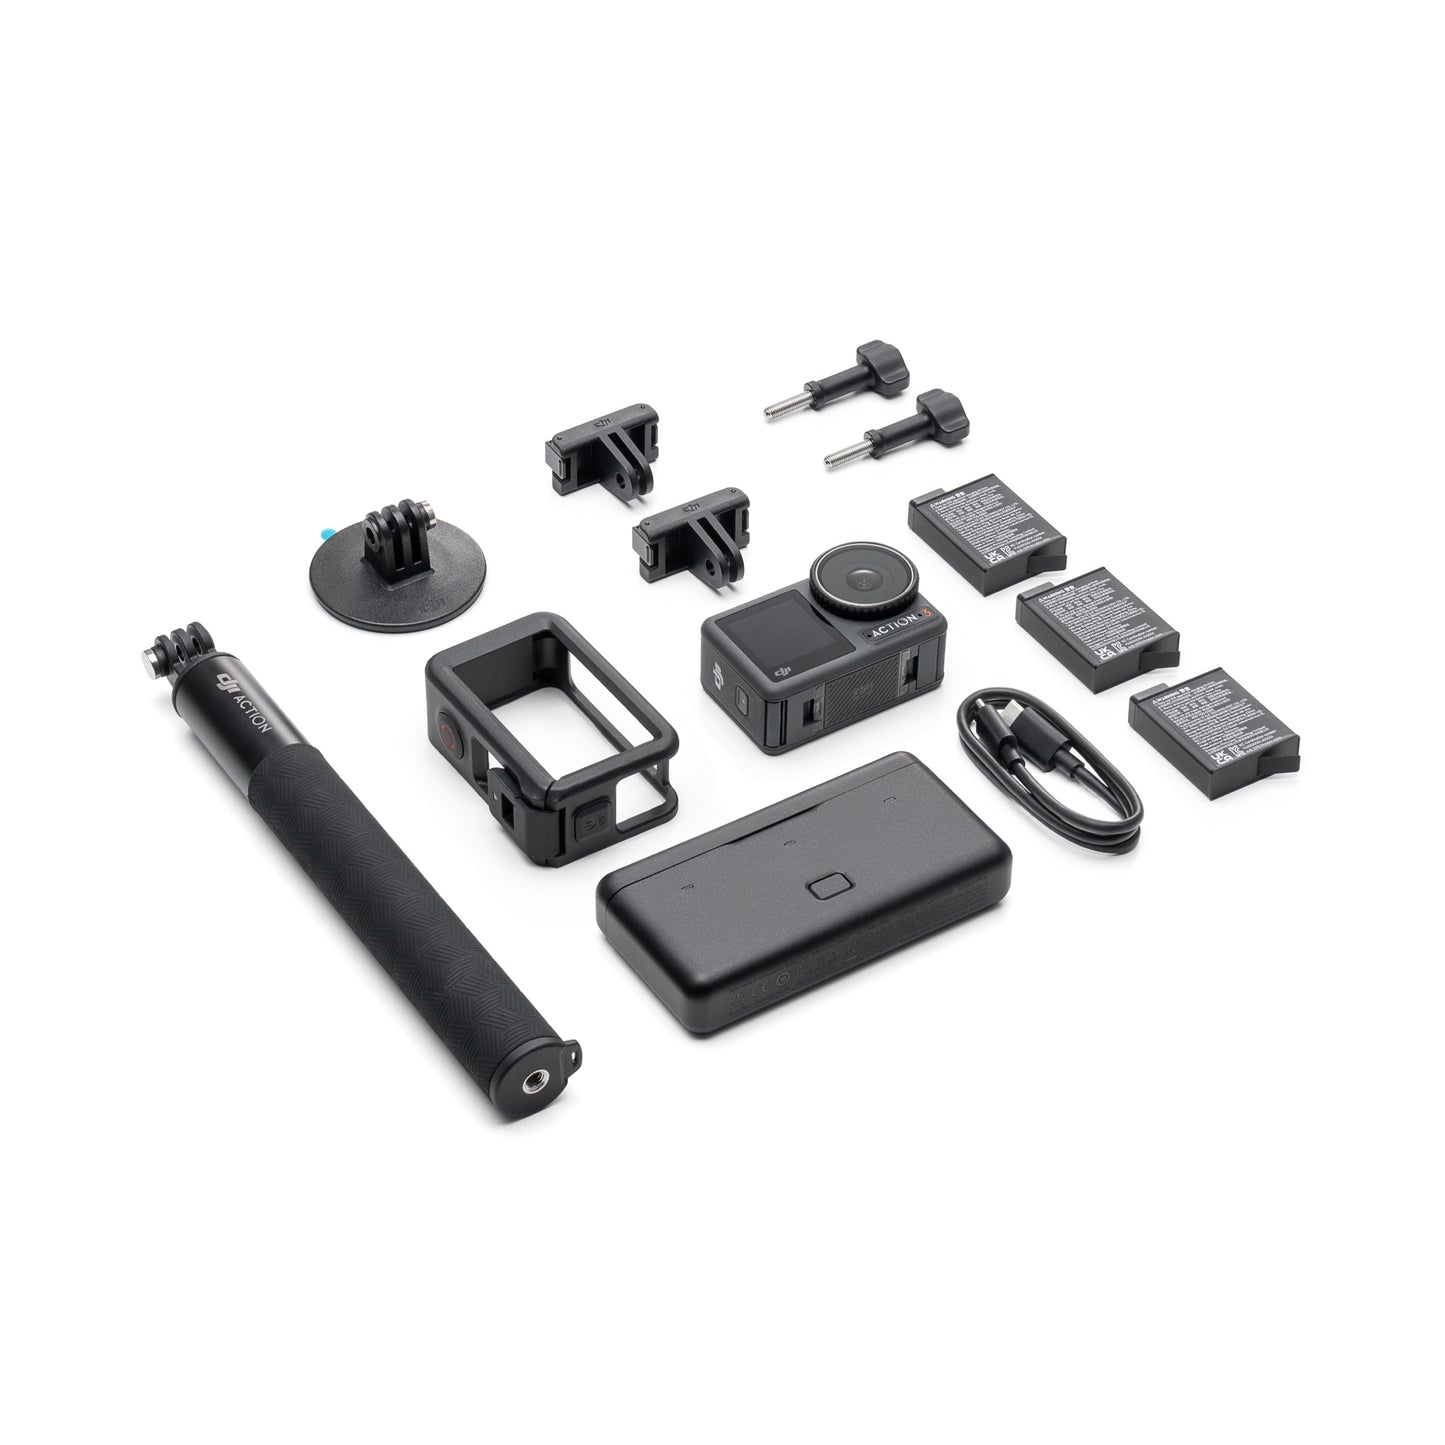 DJI Osmo Action 3 4K 120Hz Sports Camera with Cold Resistance Waterproof for Up to 16M Super Wide FOV Lens and Built-in Image Stabilization for Outdoor Videography and Vlogging (Standard and Adventure Pack Available)